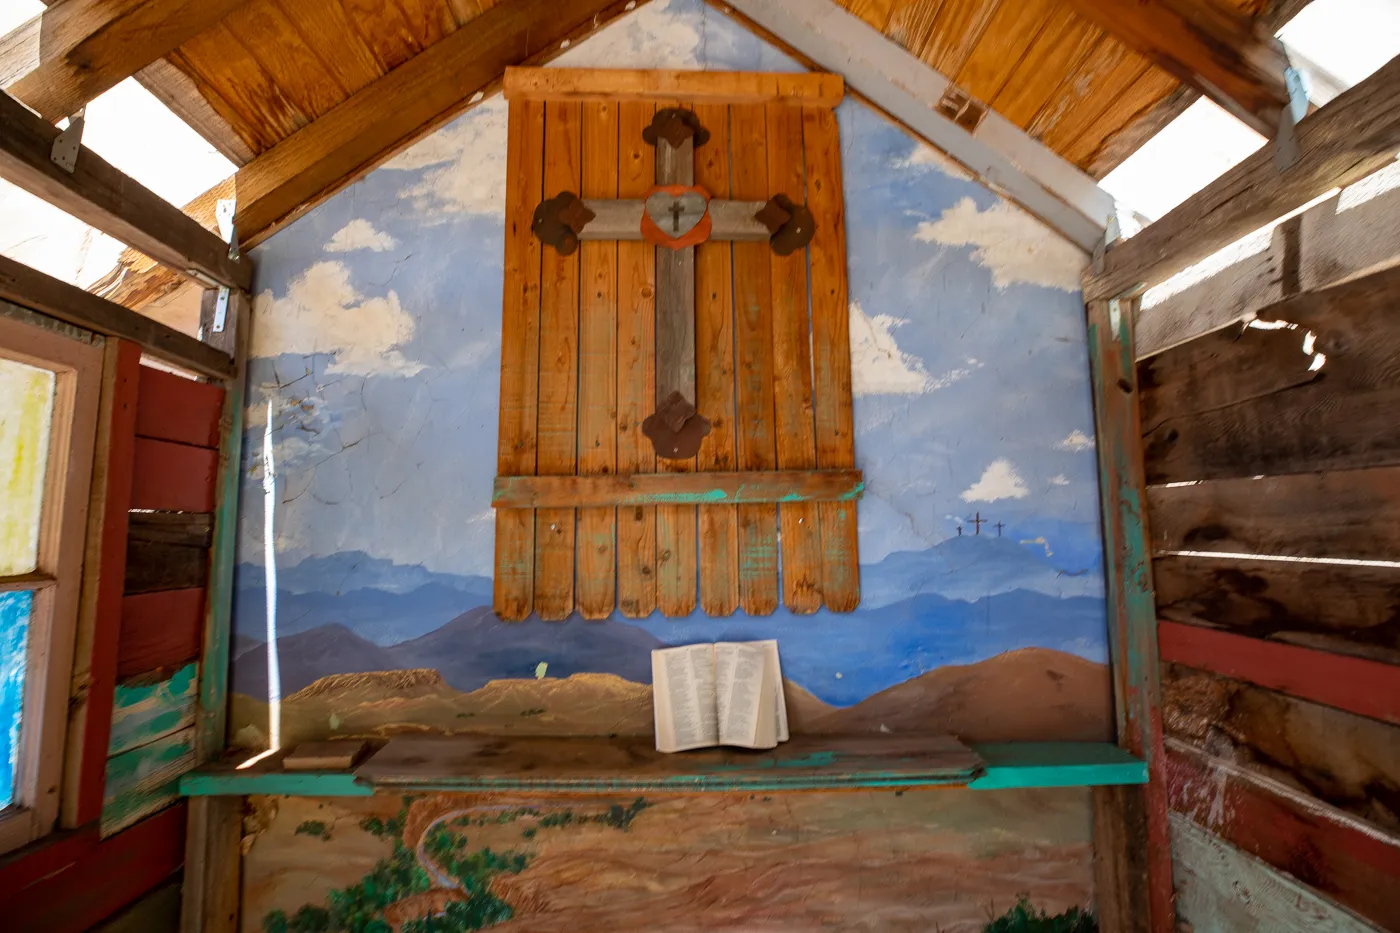 World's Smallest Church on Route 66 in Winslow, Arizona Roadside Attraction